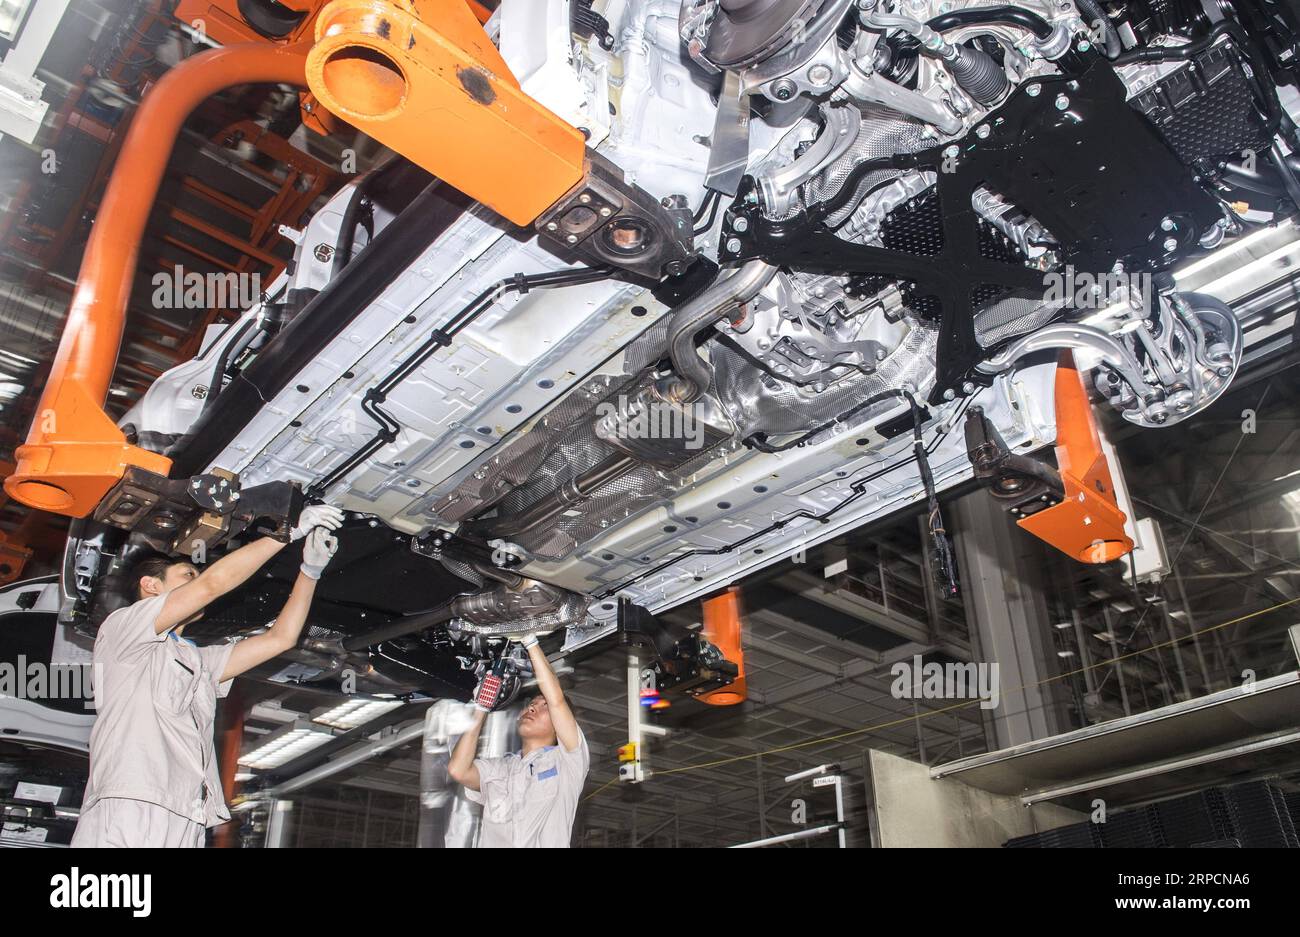 (190709) -- CHANGCHUN, July 9, 2019 -- Workers assemble an Audi vehicle at FAW-Volkswagen factory in Changchun, northeast China s Jilin Province, July 9, 2019. The Sino-German auto joint venture FAW-Volkswagen said a record 311,871 Audi vehicles were sold in China in the first half of 2019, up 2.1 percent year-on-year. ) CHINA-JILIN-CHANGCHUN-AUDI-SALES RECORD XuxChang PUBLICATIONxNOTxINxCHN Stock Photo